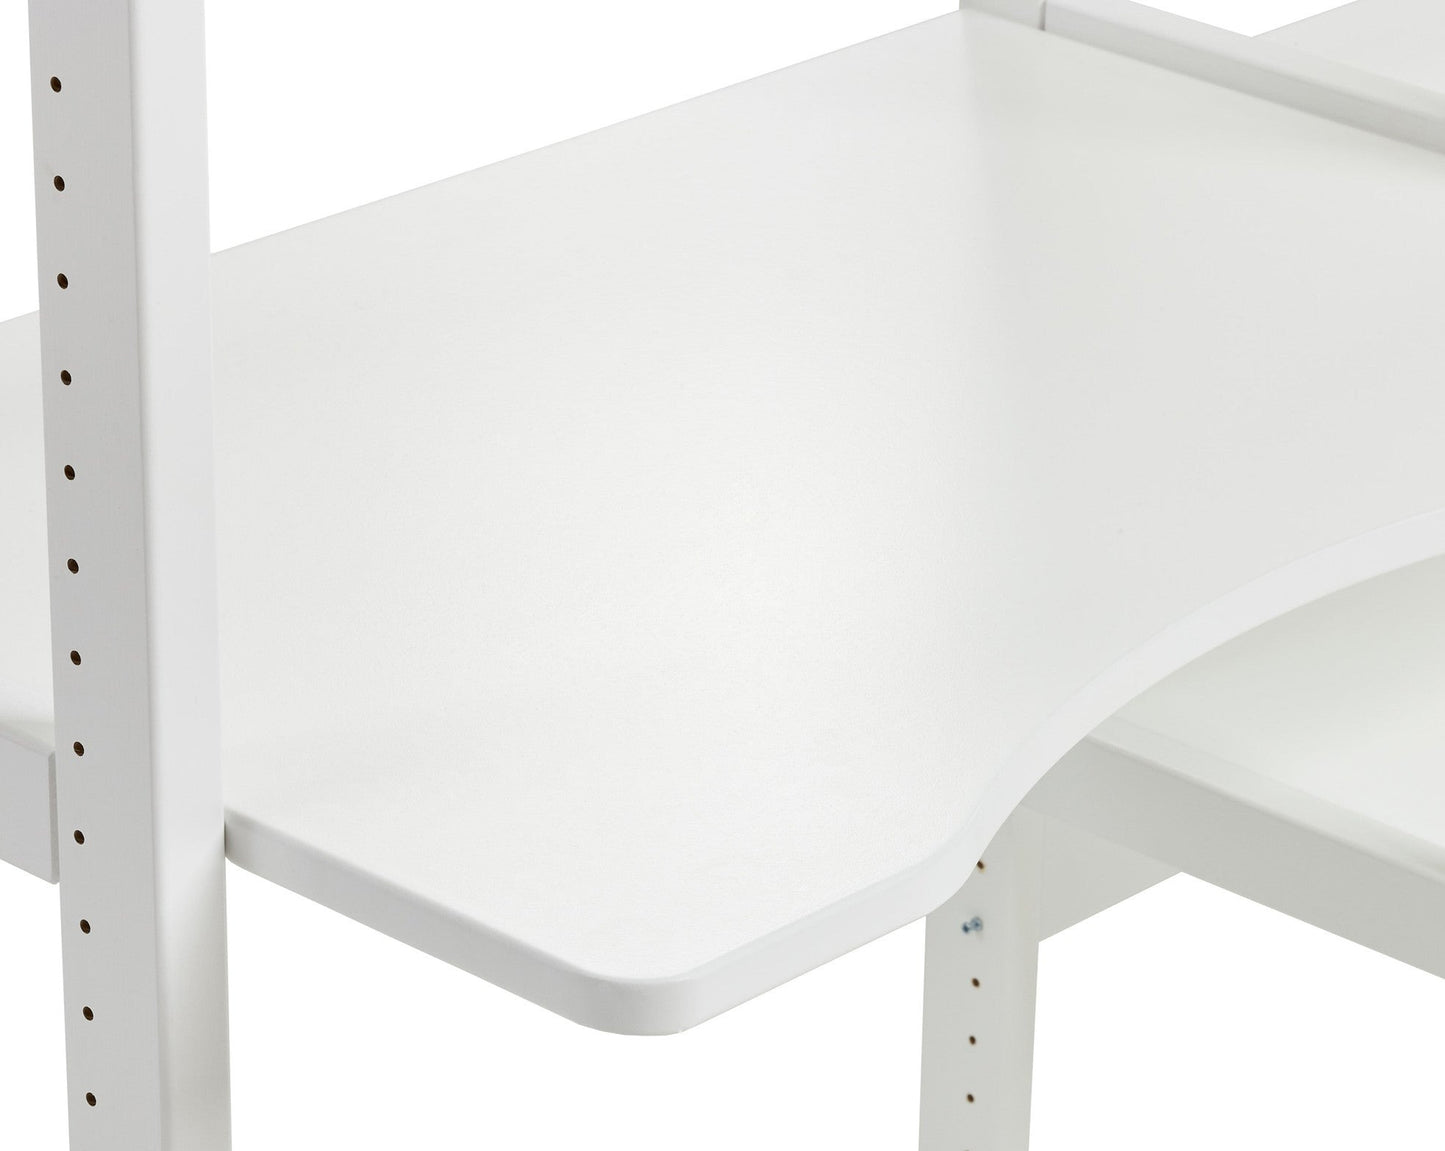 Storey - Shelf with 2 sections, 4 shelves, bed 90x200 cm and desk - 100 cm - White